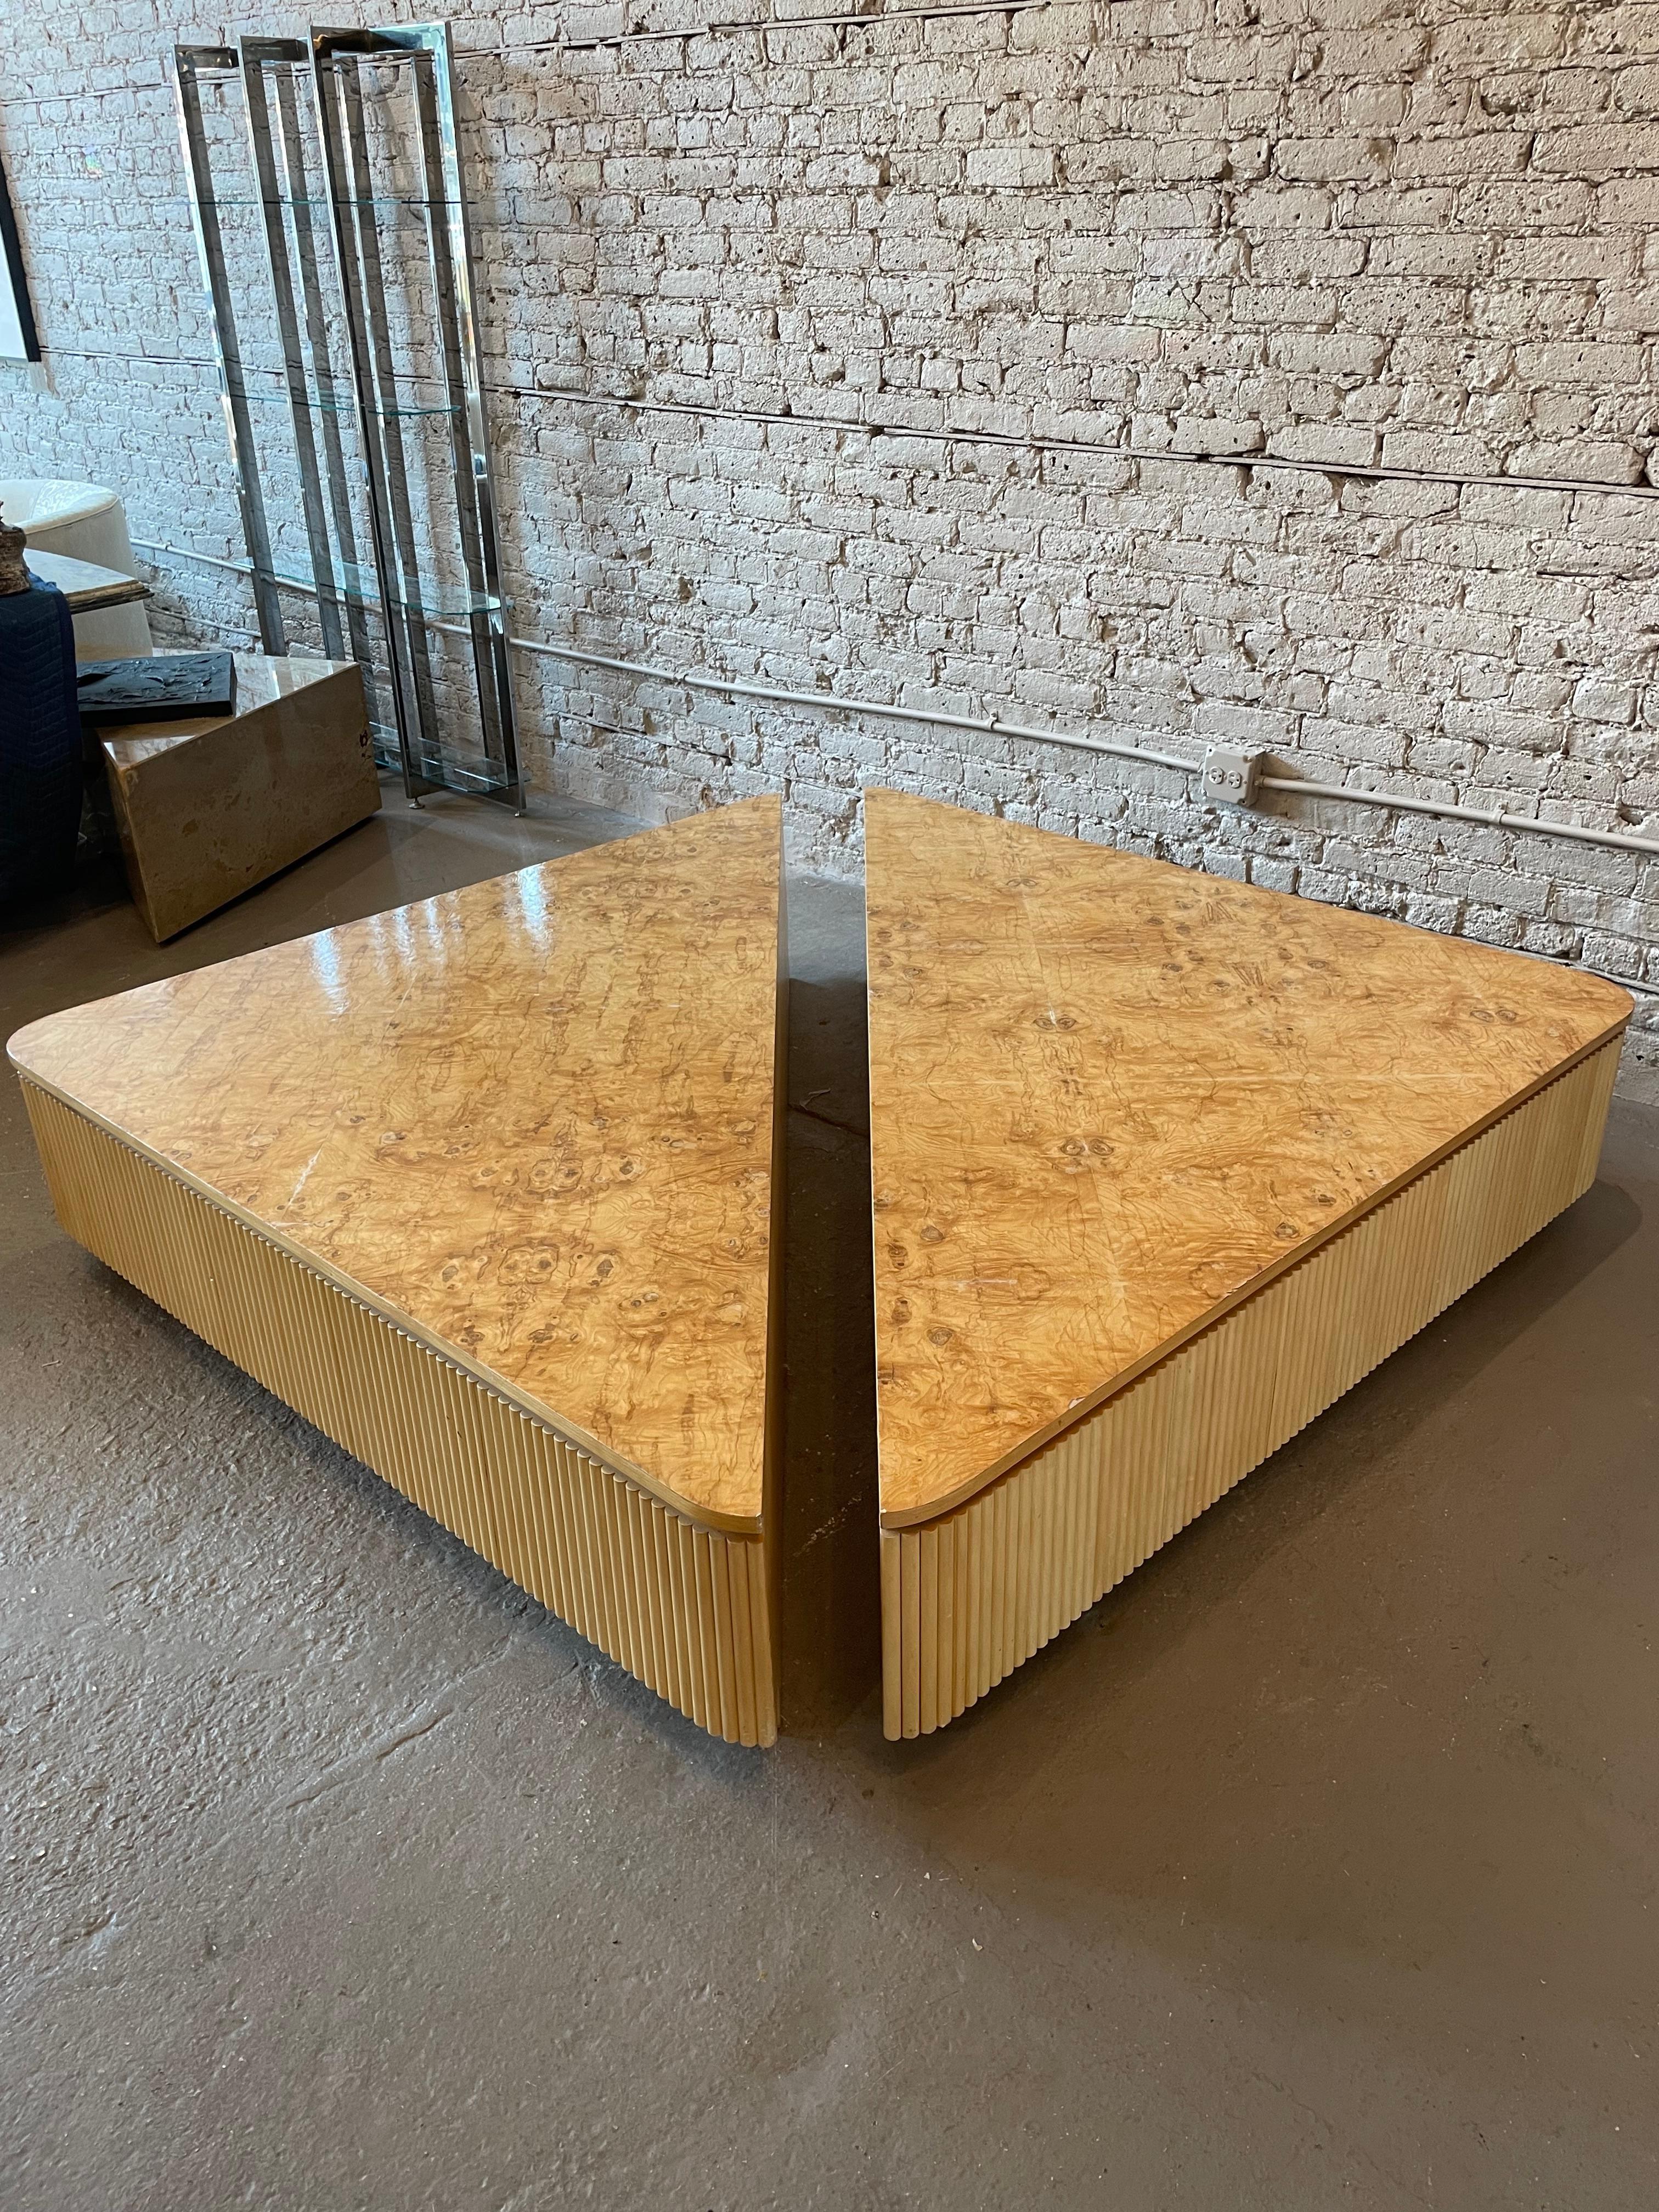 Stunning custom made solid wood coffee table. It’s actually two triangles that form a huge square 67”!!
The table is solid wood with veneer Burled wood. I have a matching 36” square coffee table listed as well.